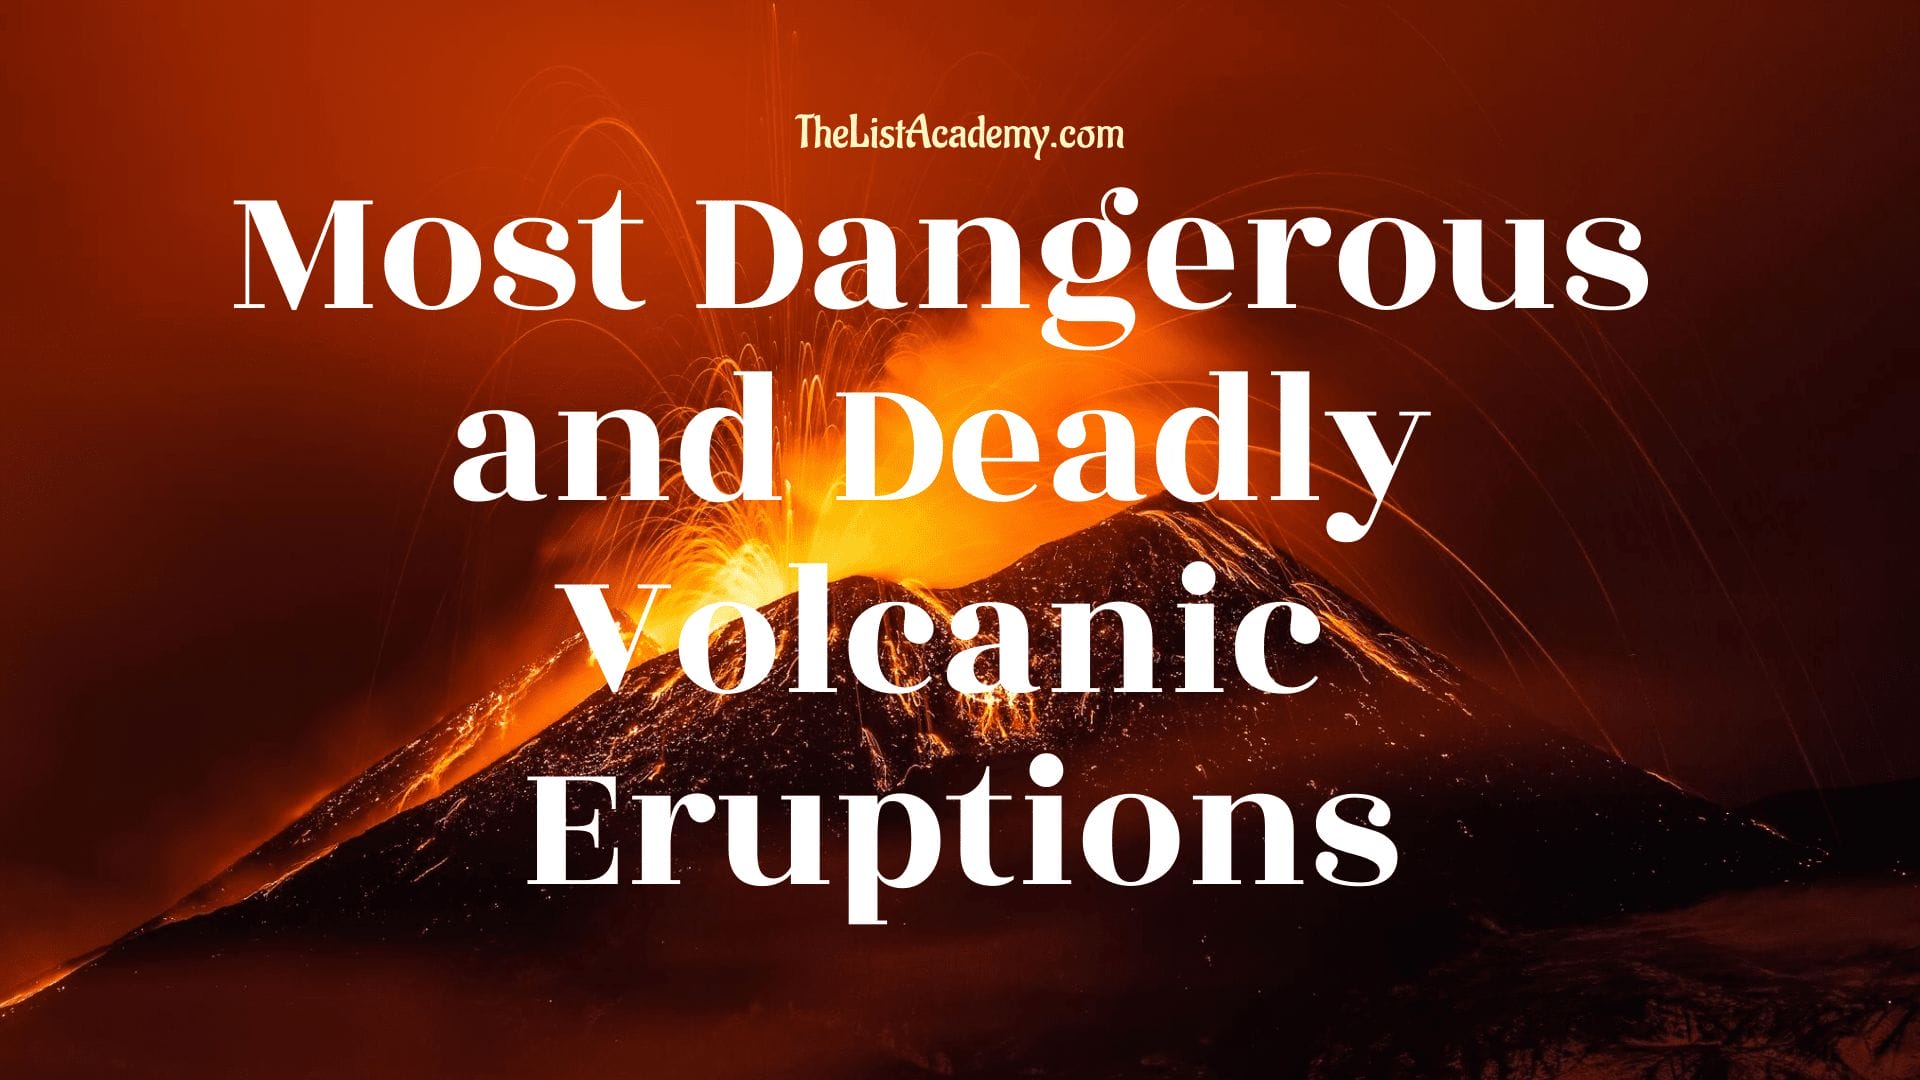 Cover Image For List : 83 Most Dangerous And Deadly Volcanic Eruptions